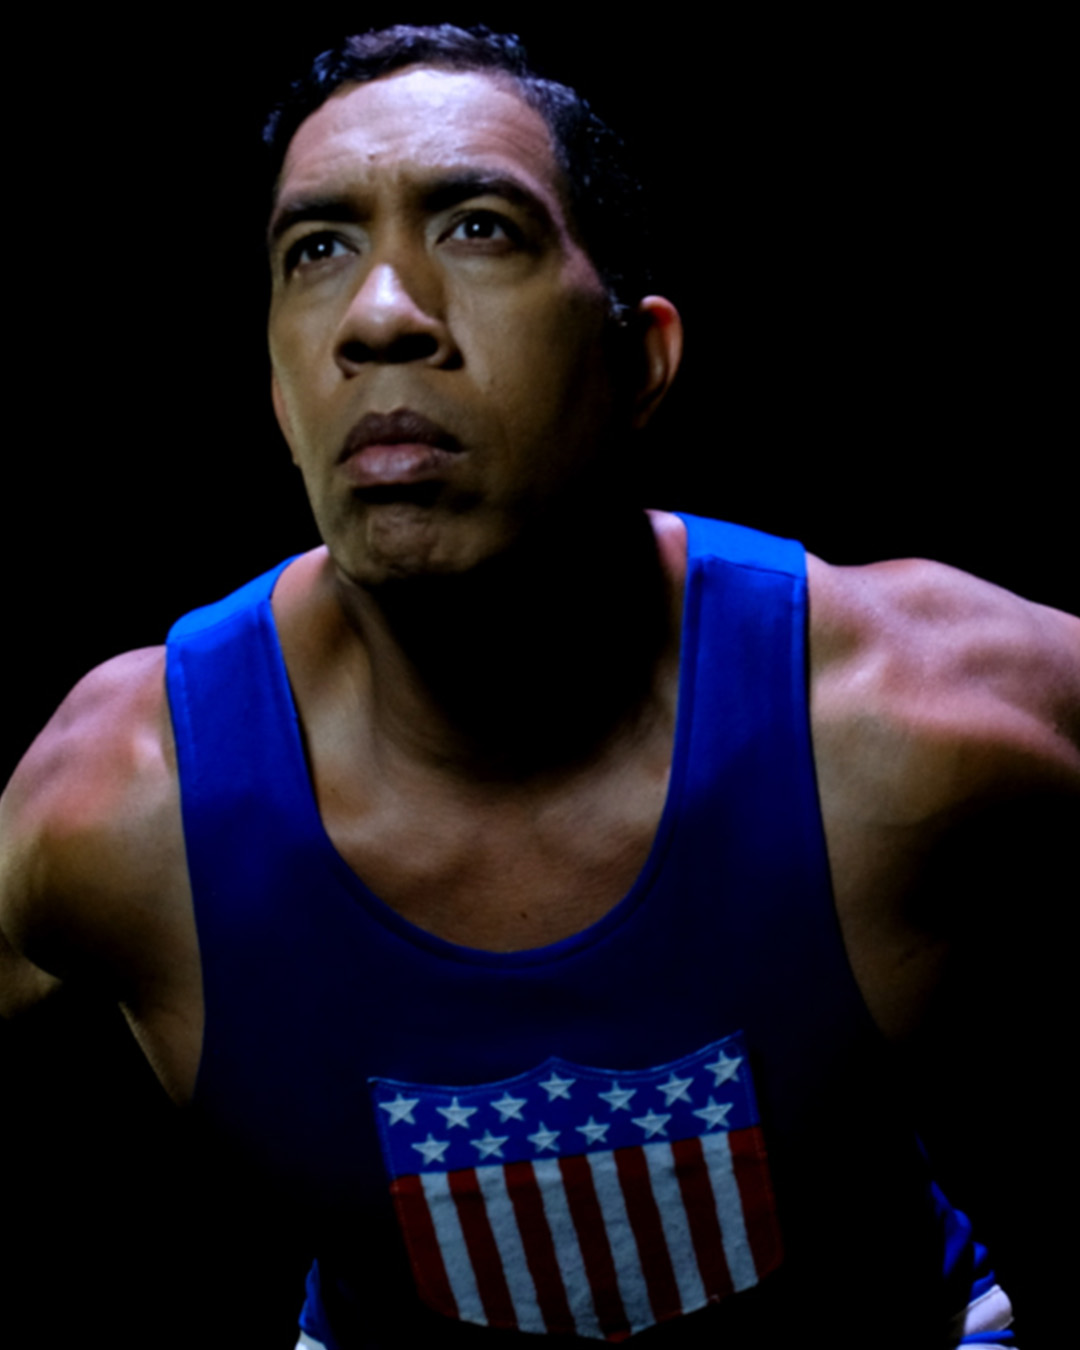 An actor wearing a blue tank top with a stars and stripes logo on front